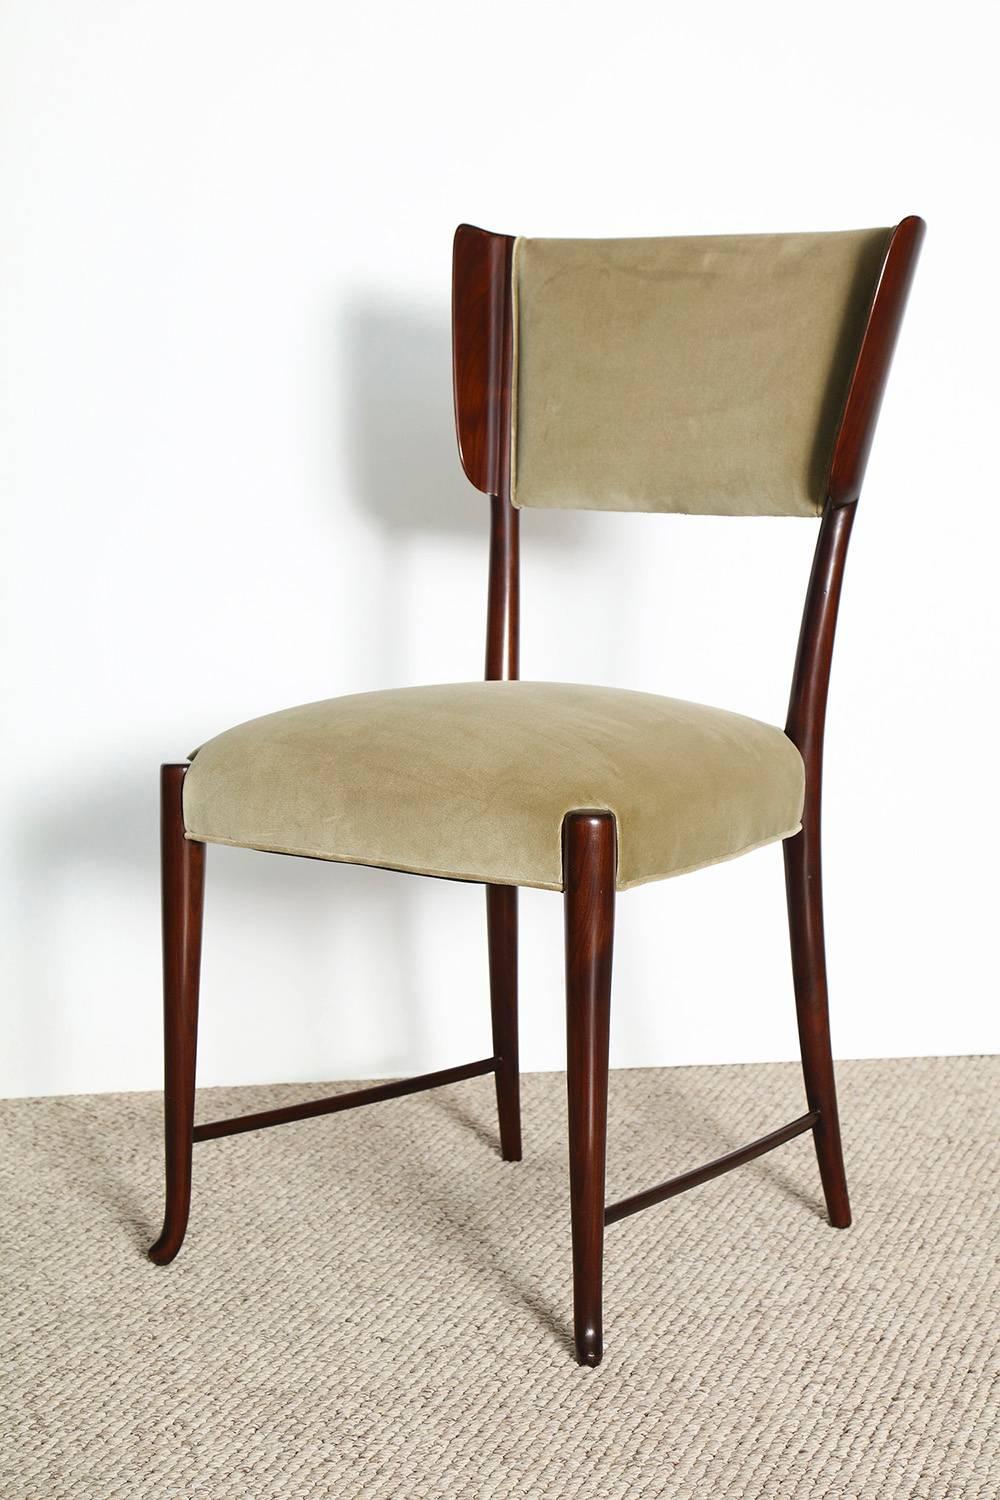 Set of Six Dining Chairs by Paolo Buffa.  Elegant dark mahogany frames with subtle wingback details, cabriole legs and lower stretchers. A rare Buffa model. Cost includes all chairs refinished and upholstered in fabric supplied by client.